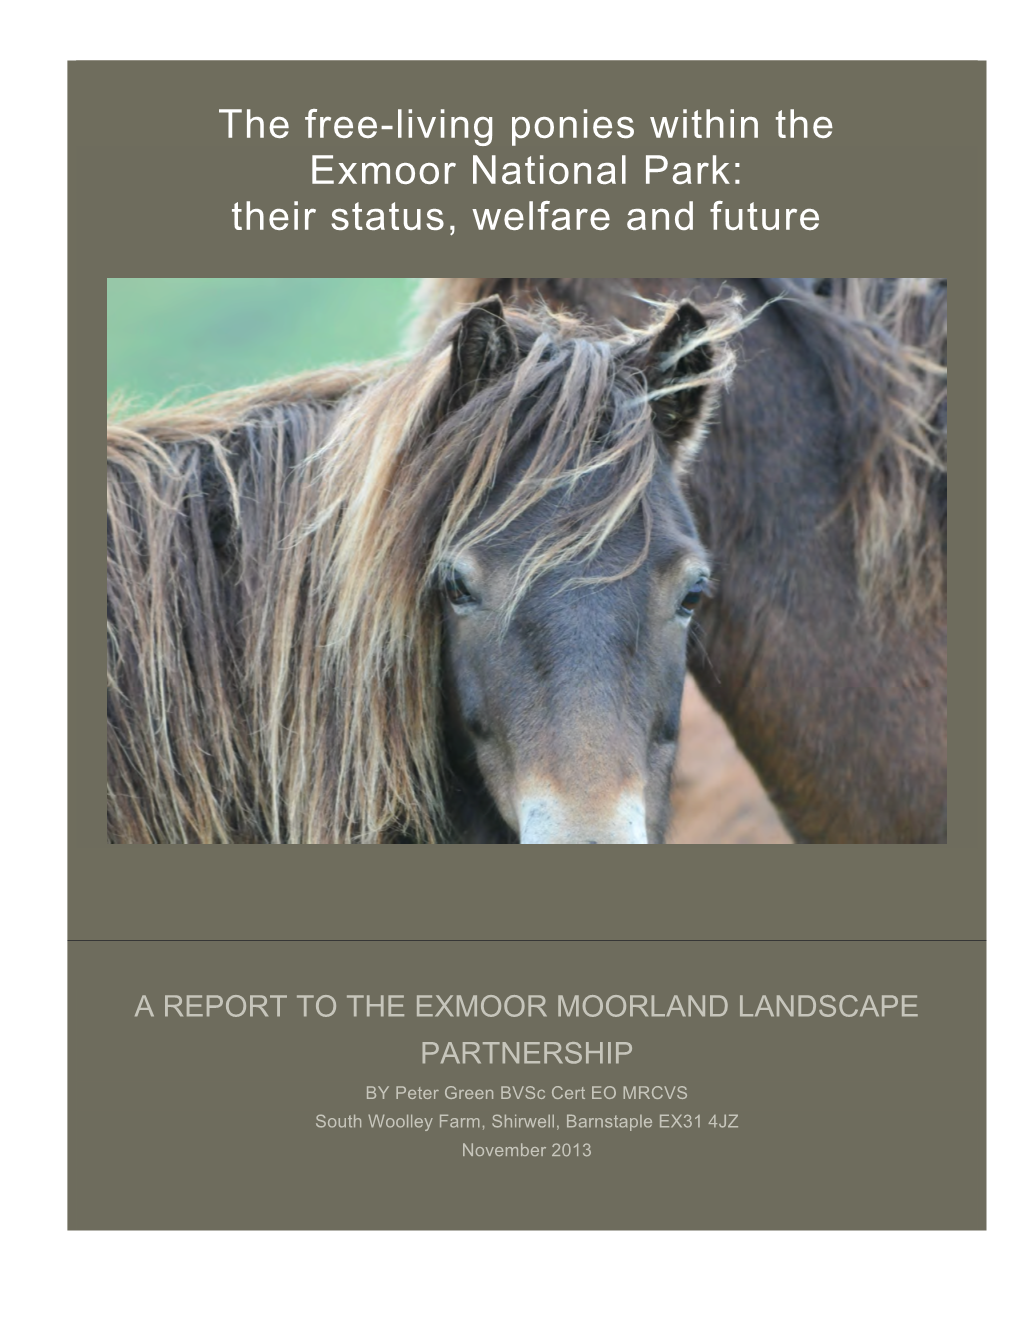 The Free-Living Ponies Within the Exmoor National Park: Their Status, Welfare and Future